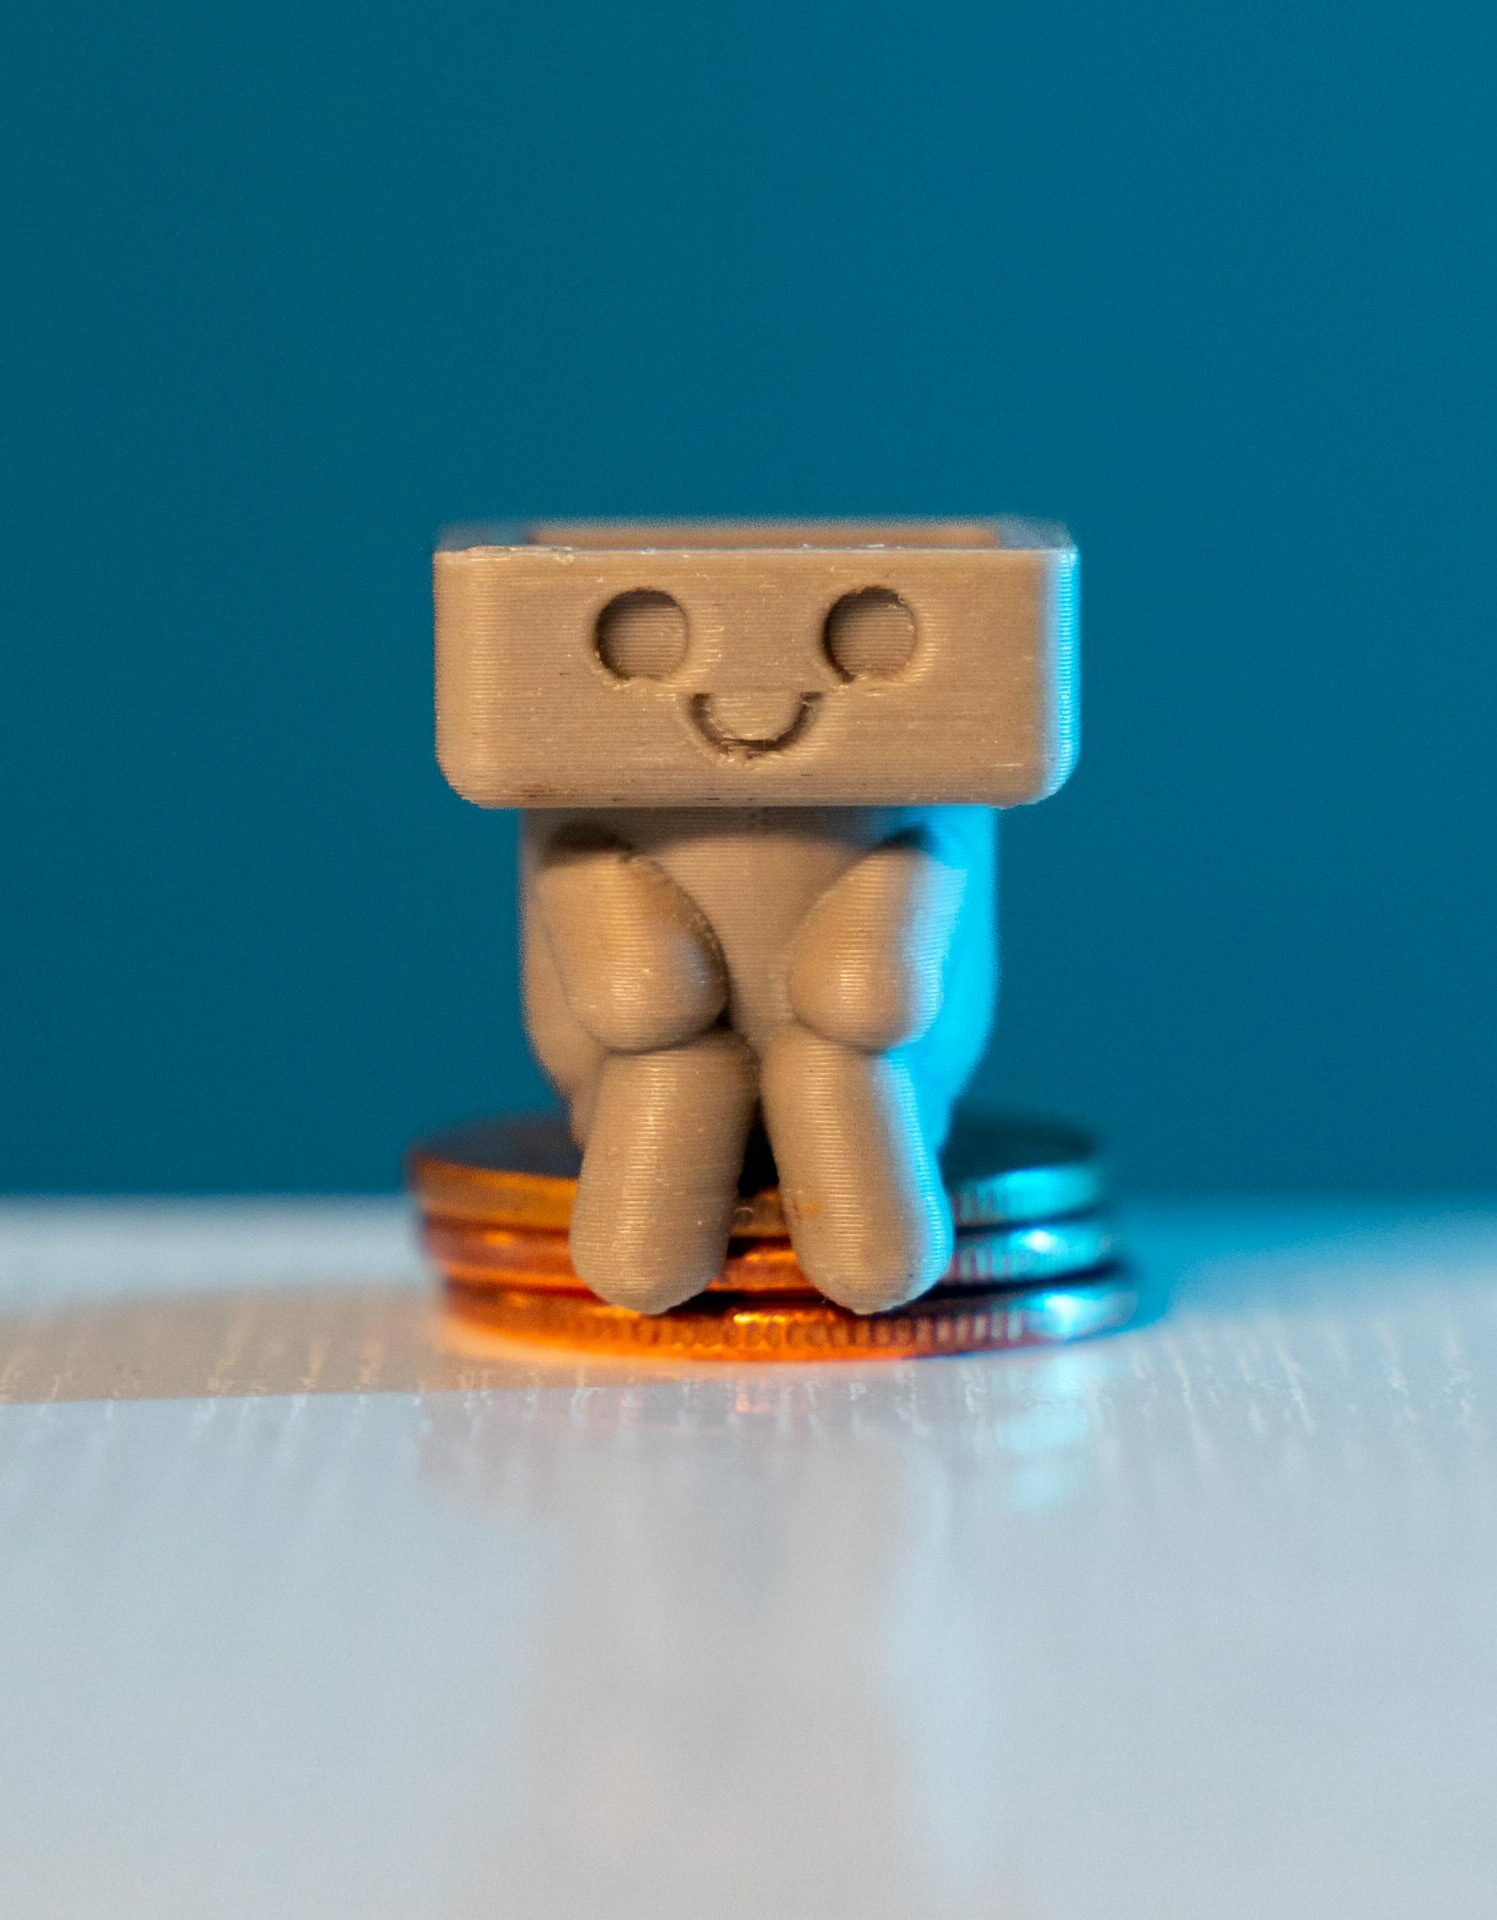 A cute 3D printed figure sitting on coins